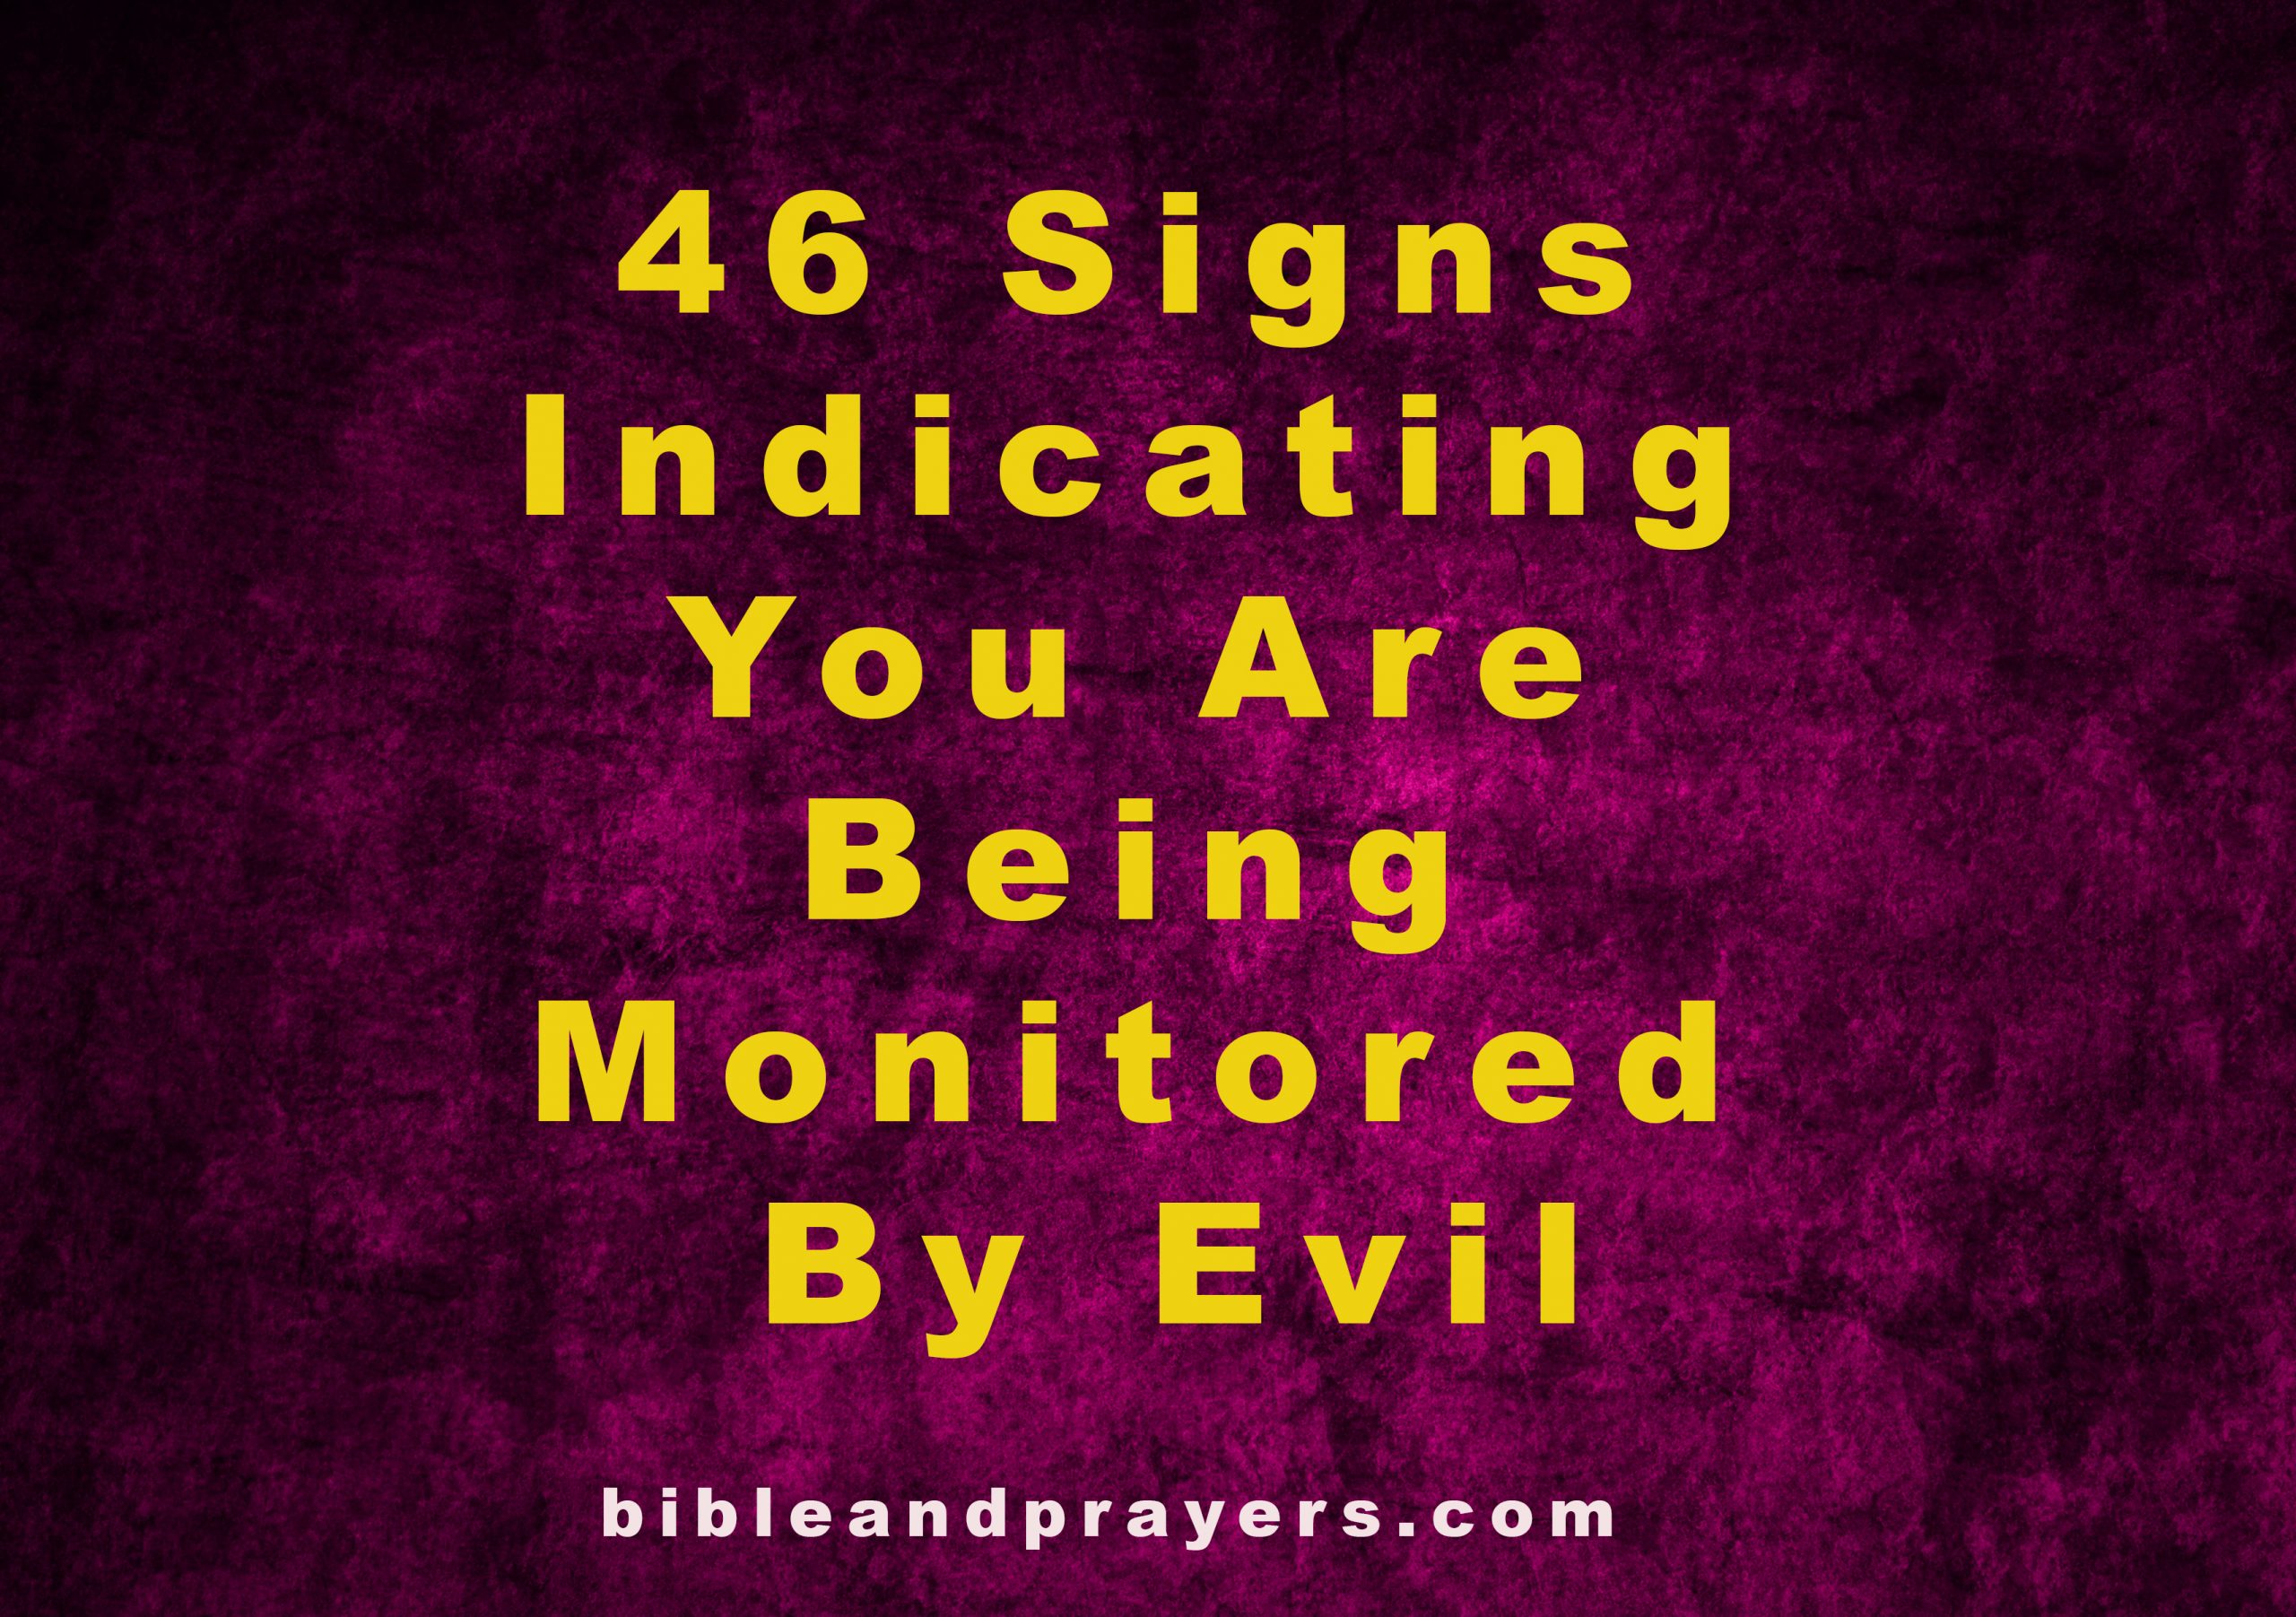 Signs Indicating You Are Being Monitored By Evil